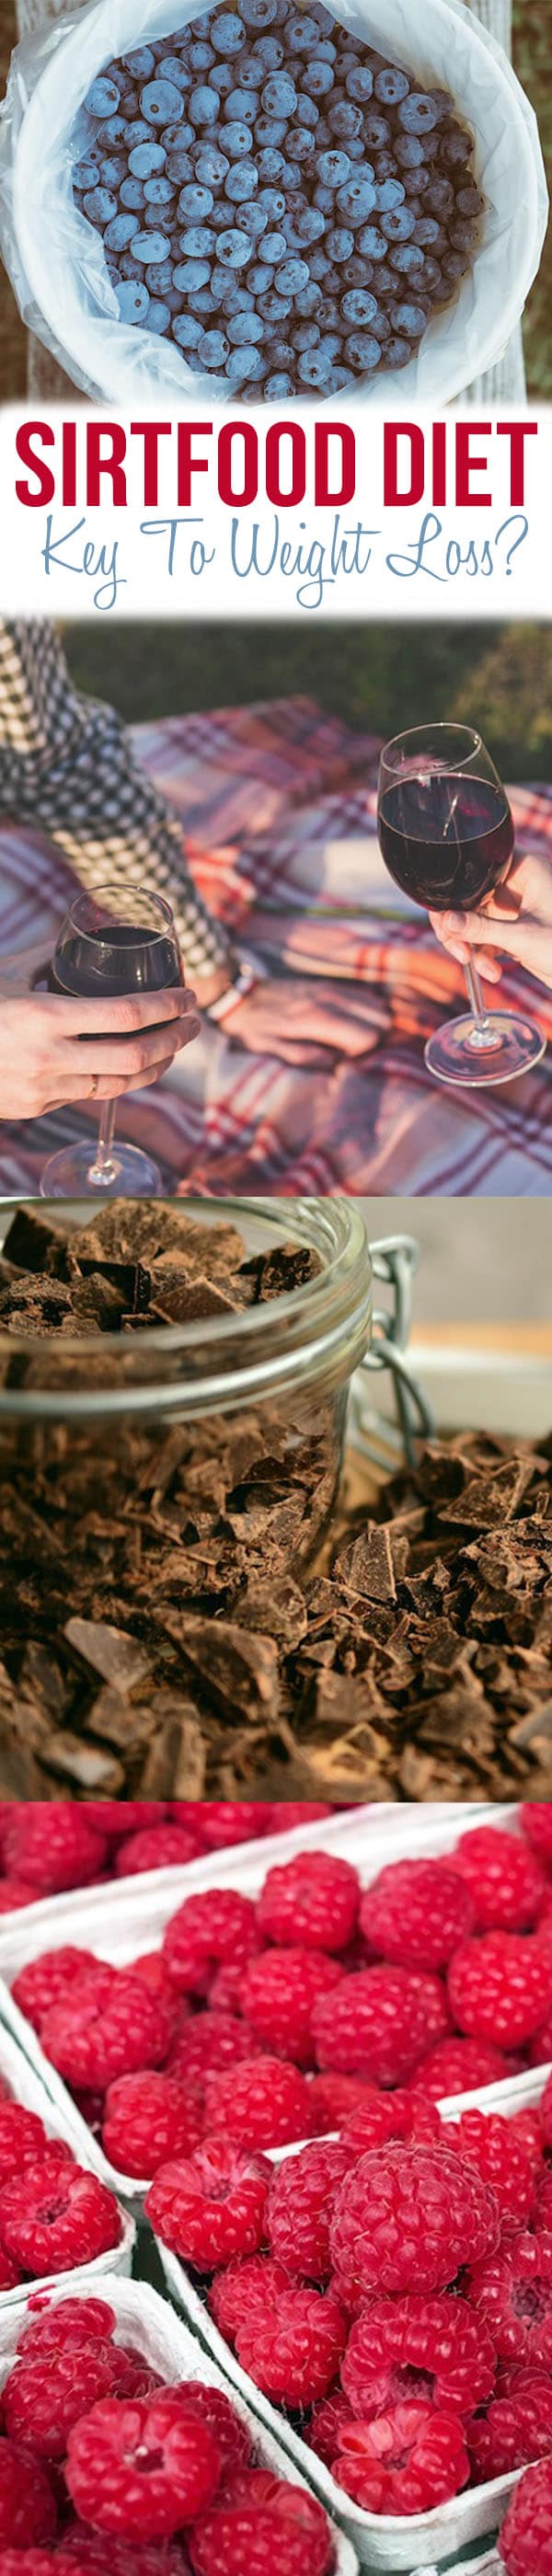 A pinterest image showing hands holding wine glasses and of chopped chocolate.